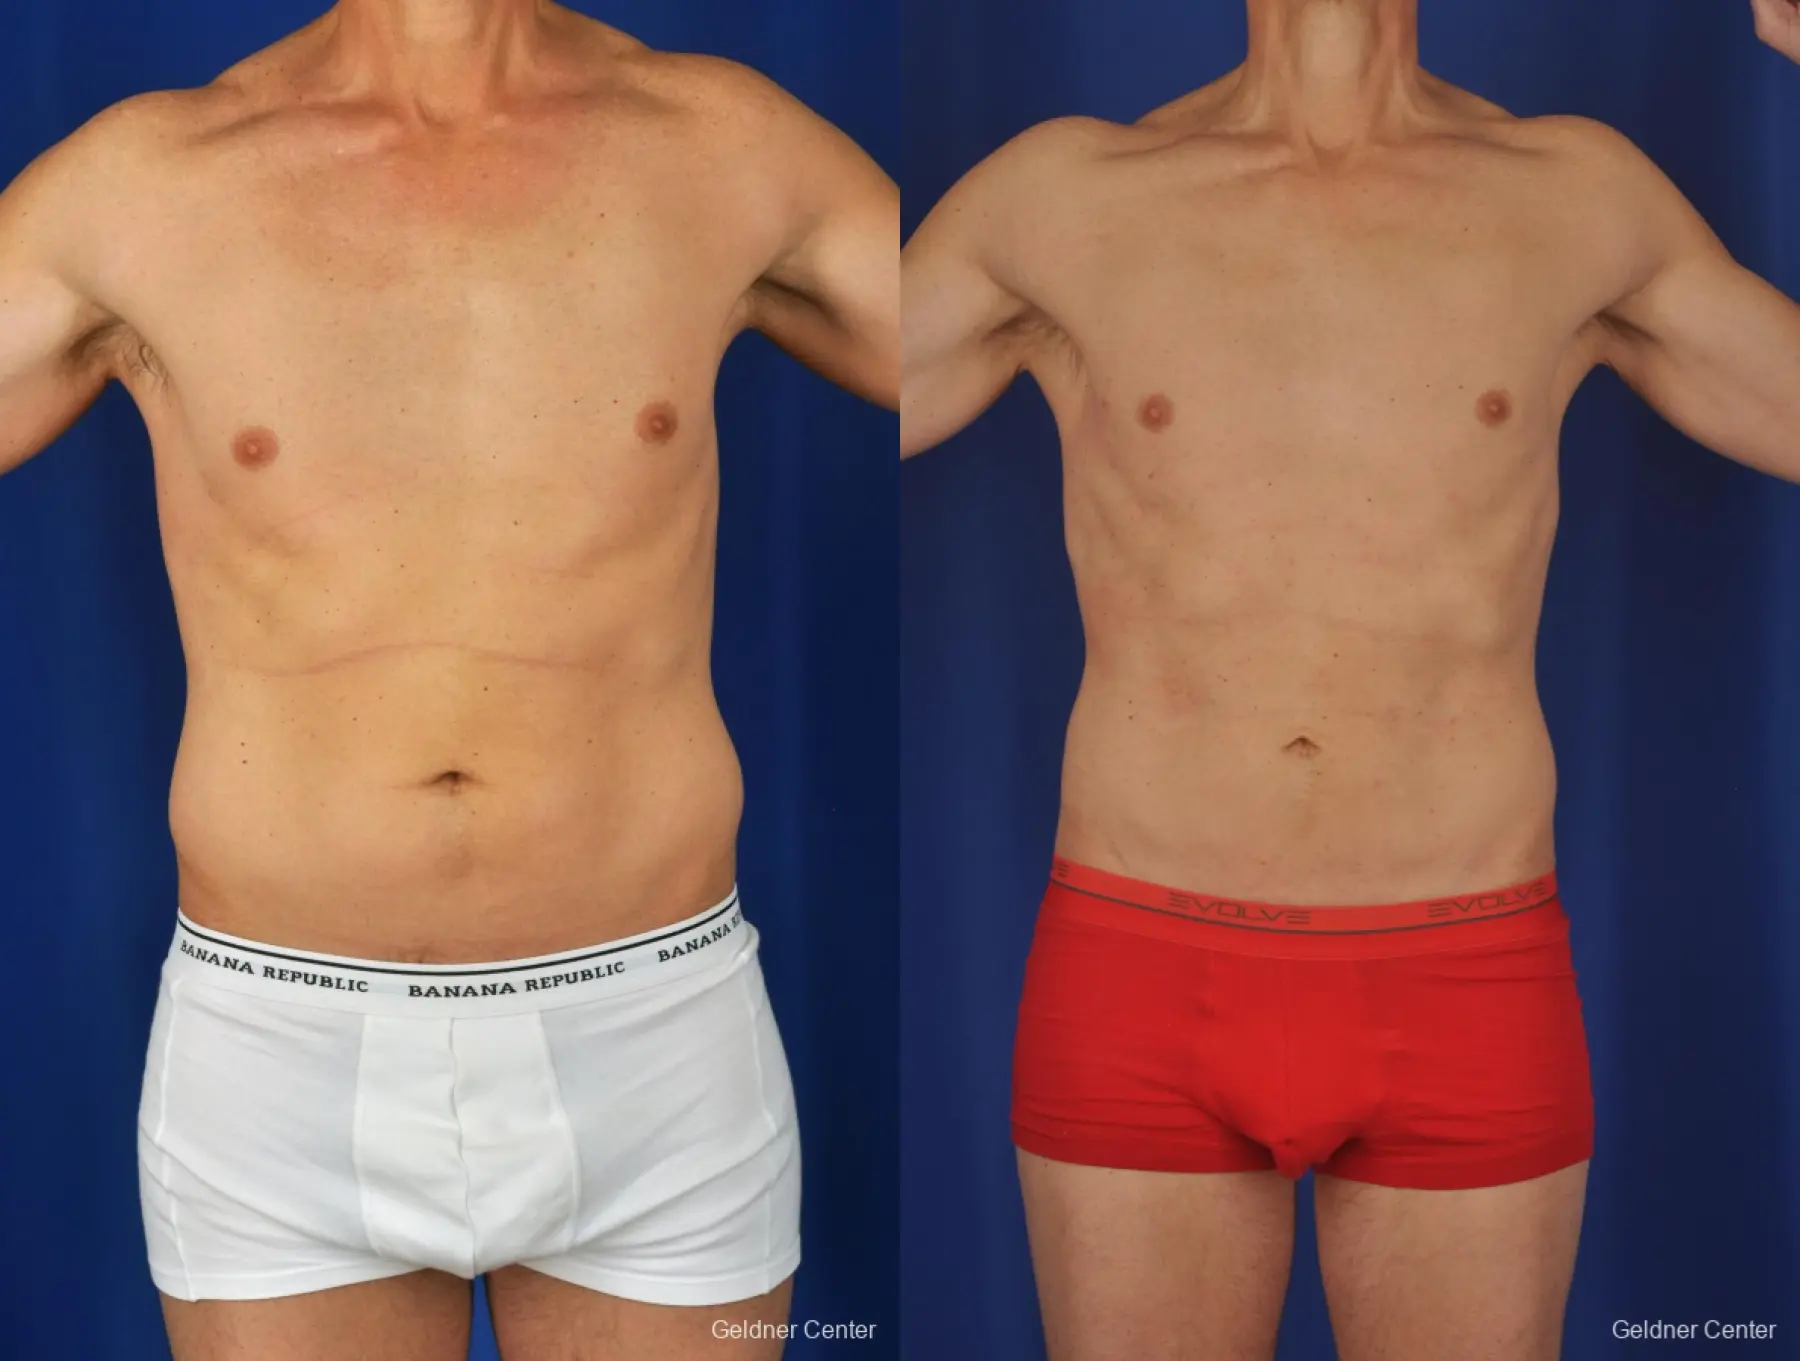 Liposuction For Men: Patient 2 - Before and After 1